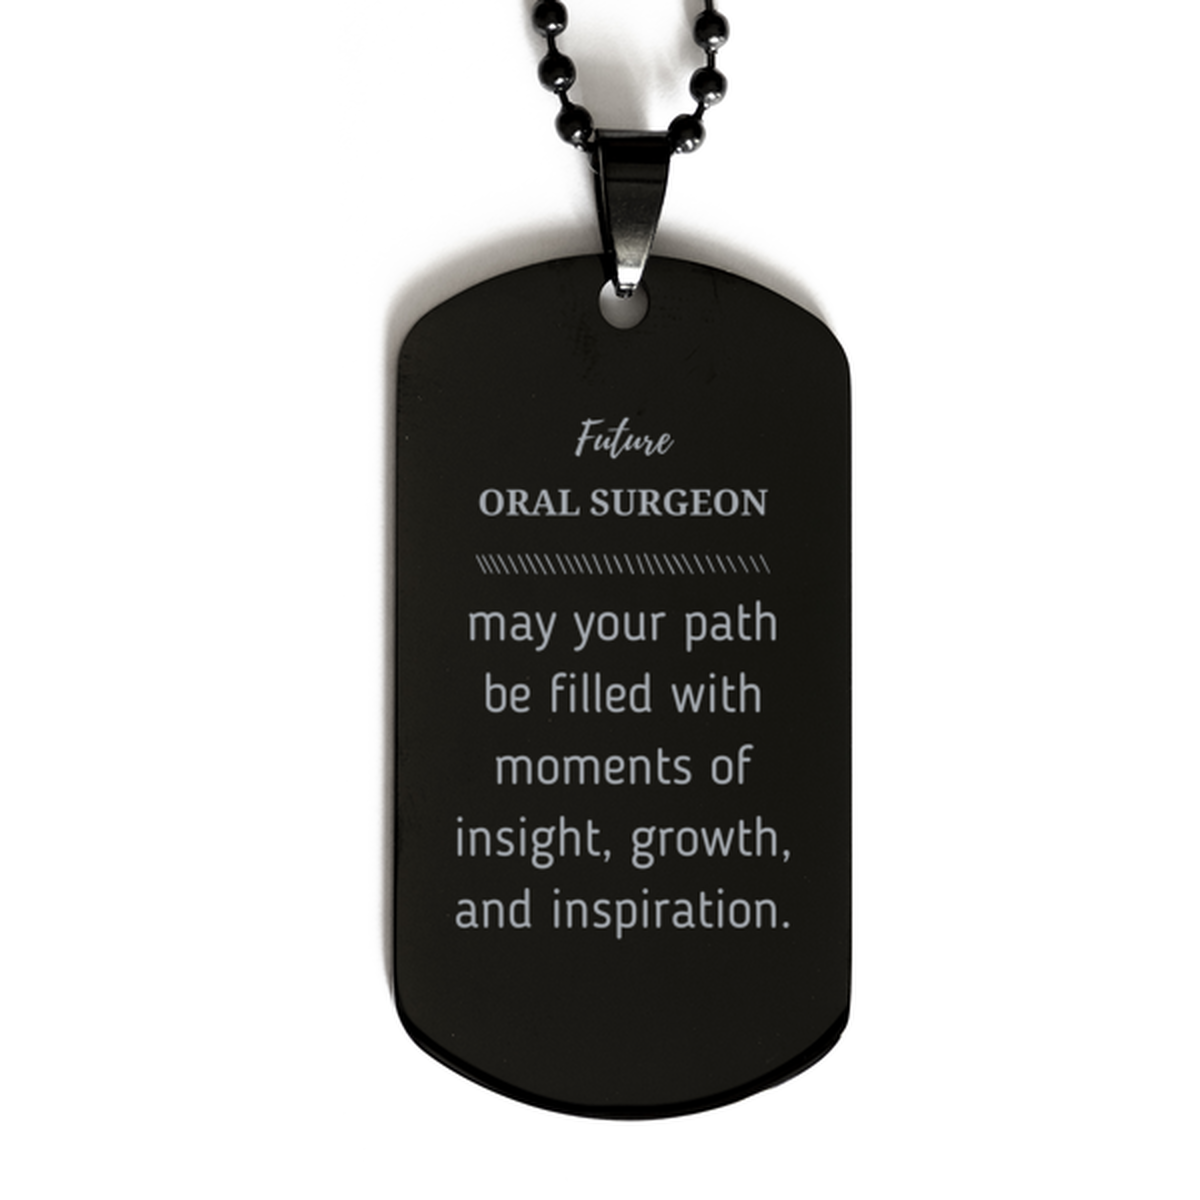 Future Oral Surgeon Gifts, May your path be filled with moments of insight, Graduation Gifts for New Oral Surgeon, Christmas Unique Black Dog Tag For Men, Women, Friends